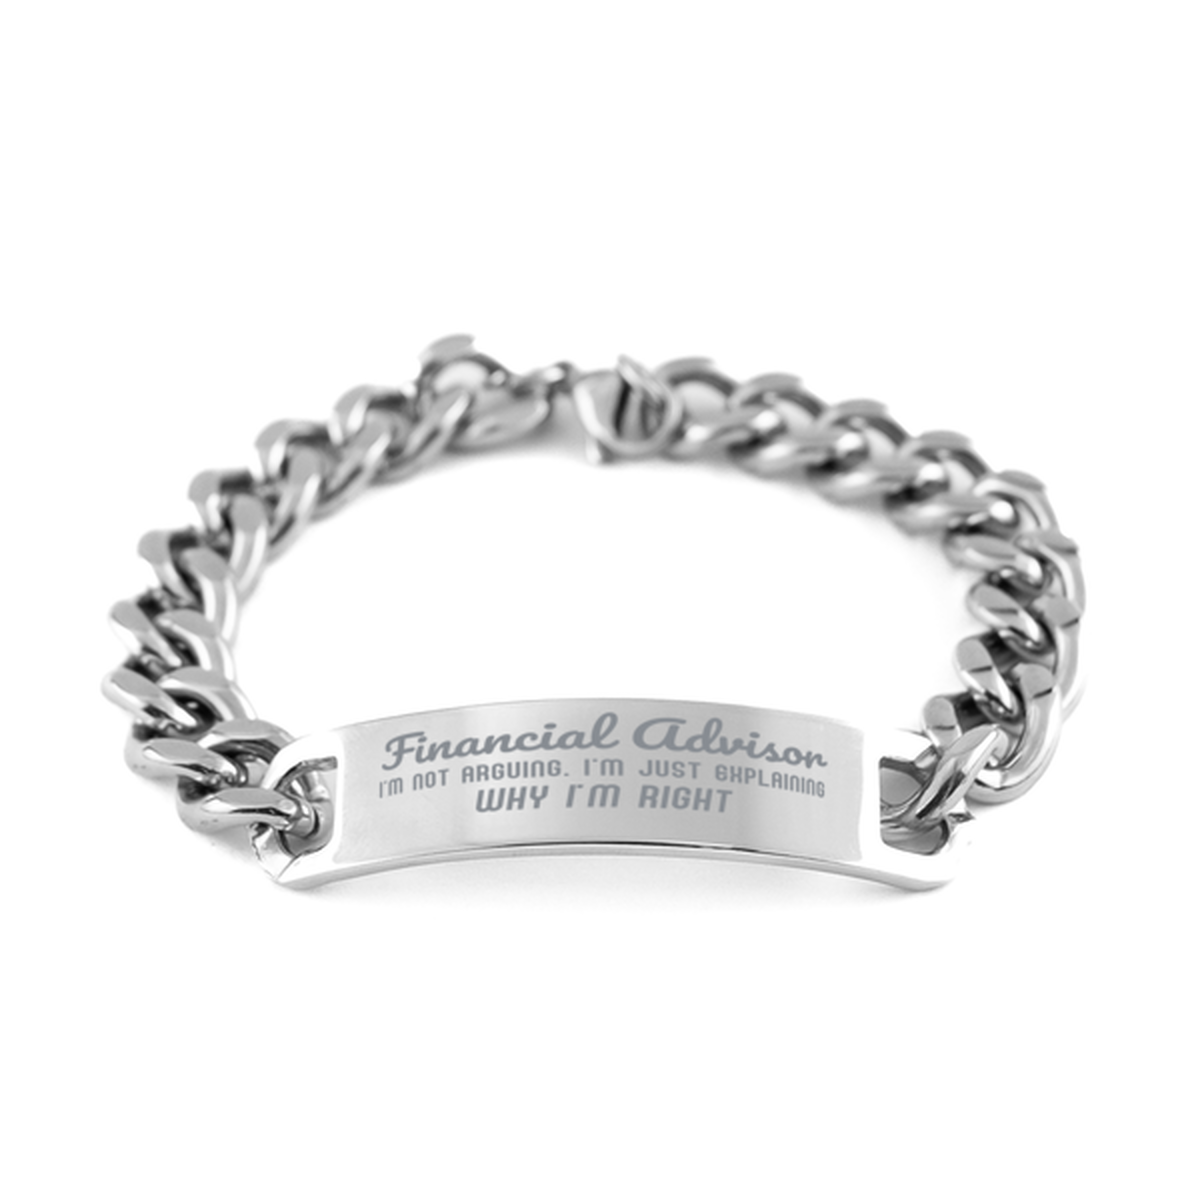 Financial Advisor I'm not Arguing. I'm Just Explaining Why I'm RIGHT Cuban Chain Stainless Steel Bracelet, Graduation Birthday Christmas Financial Advisor Gifts For Financial Advisor Funny Saying Quote Present for Men Women Coworker